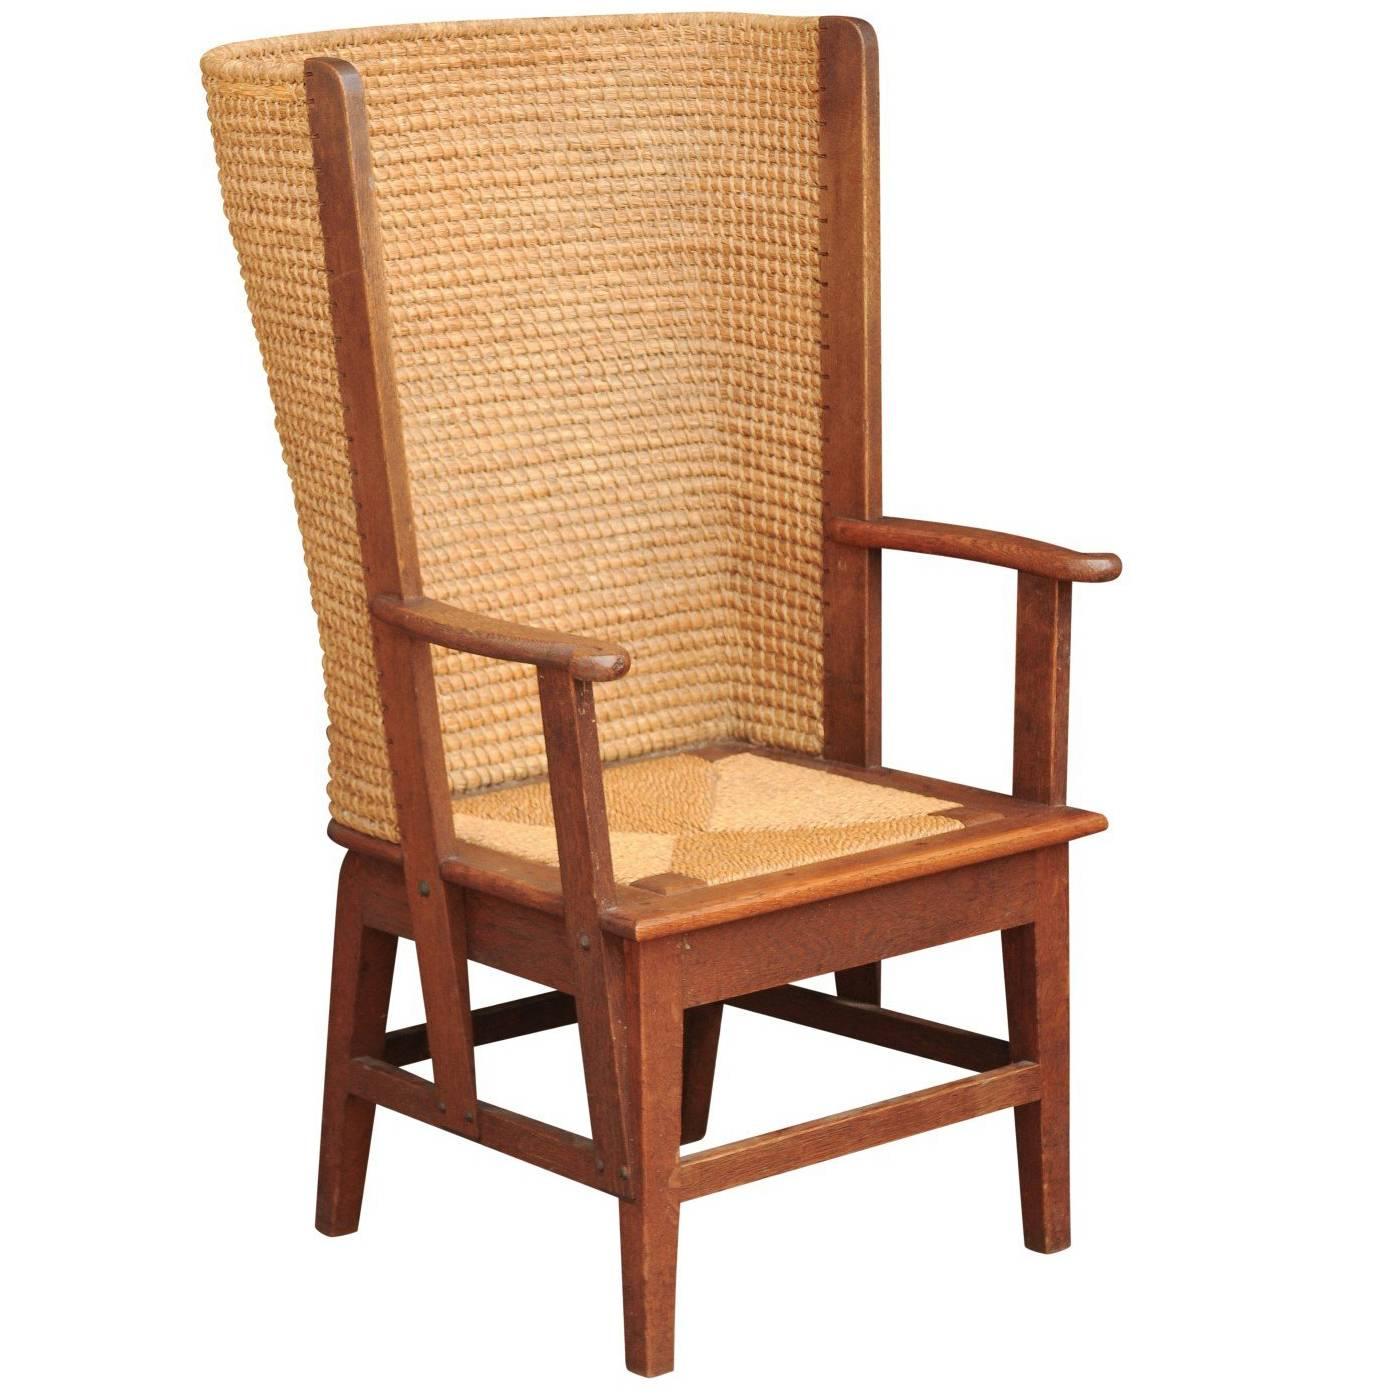 Late 19th Century Scottish Orkney Chair with Wraparound Handwoven Straw Back